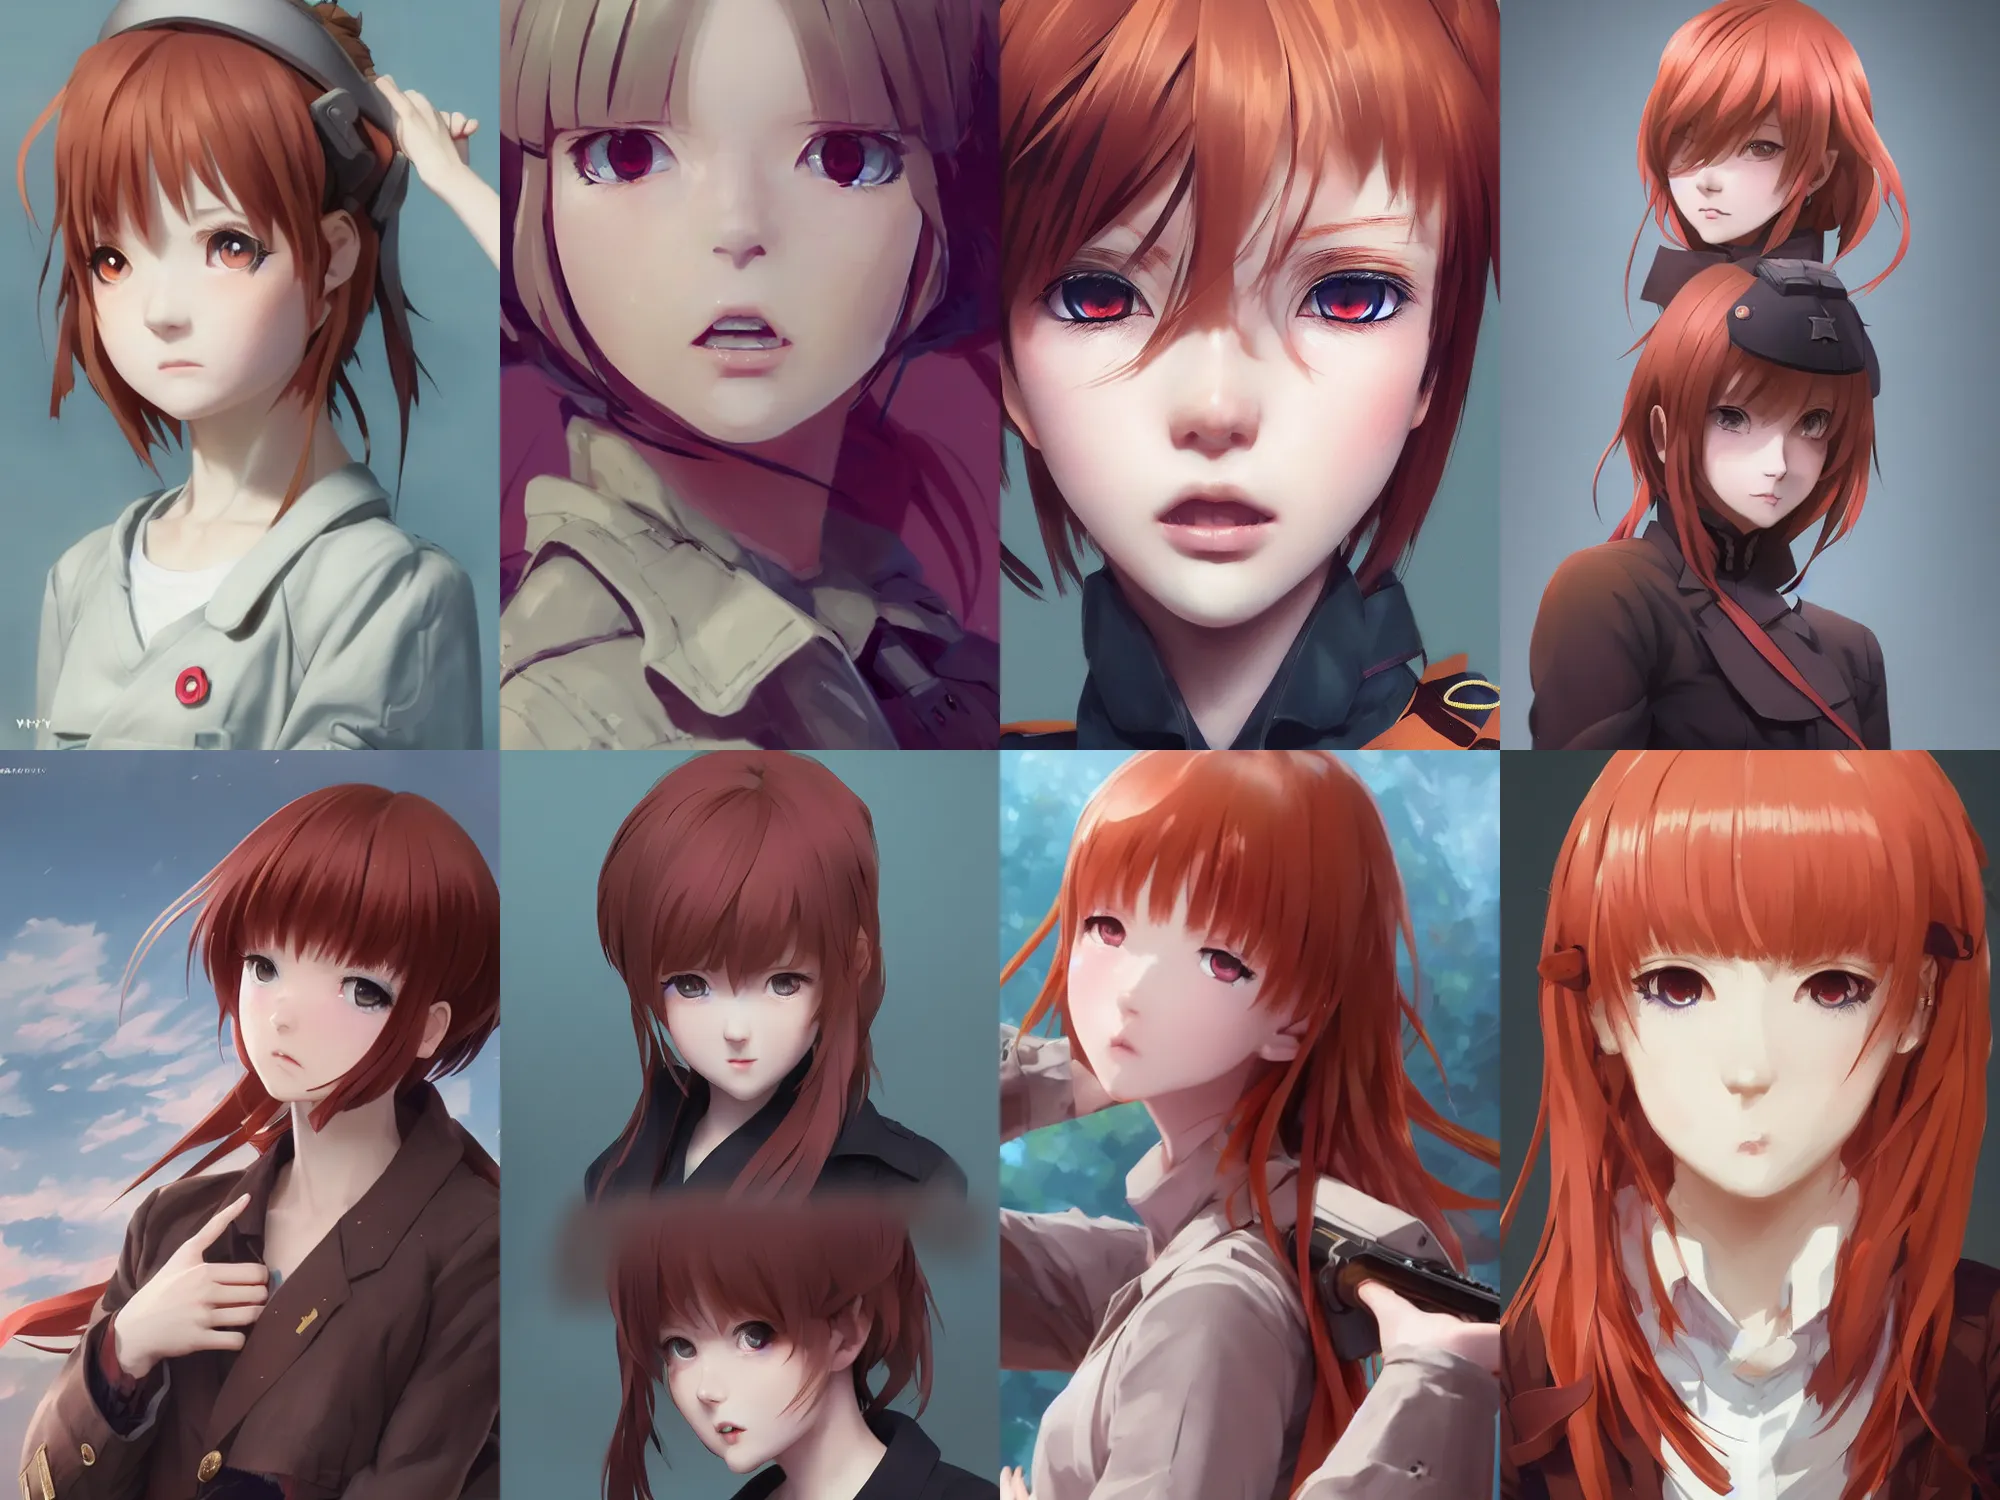 Prompt: Very complicated dynamic composition, realistic anime style at Pixiv CGSociety by WLOP, ilya kuvshinov, krenz cushart, Greg Rutkowski, trending on artstation. Zbrush sculpt colored, Octane render in Maya and Houdini VFX, close-up portrait of young redhead girl in motion, she is cute, innocent, frightened, wearing military uniform, silky hair, stunning deep eyes. Very expressive and inspirational. Amazing textured brush strokes. Cinematic dramatic soft volumetric studio lighting